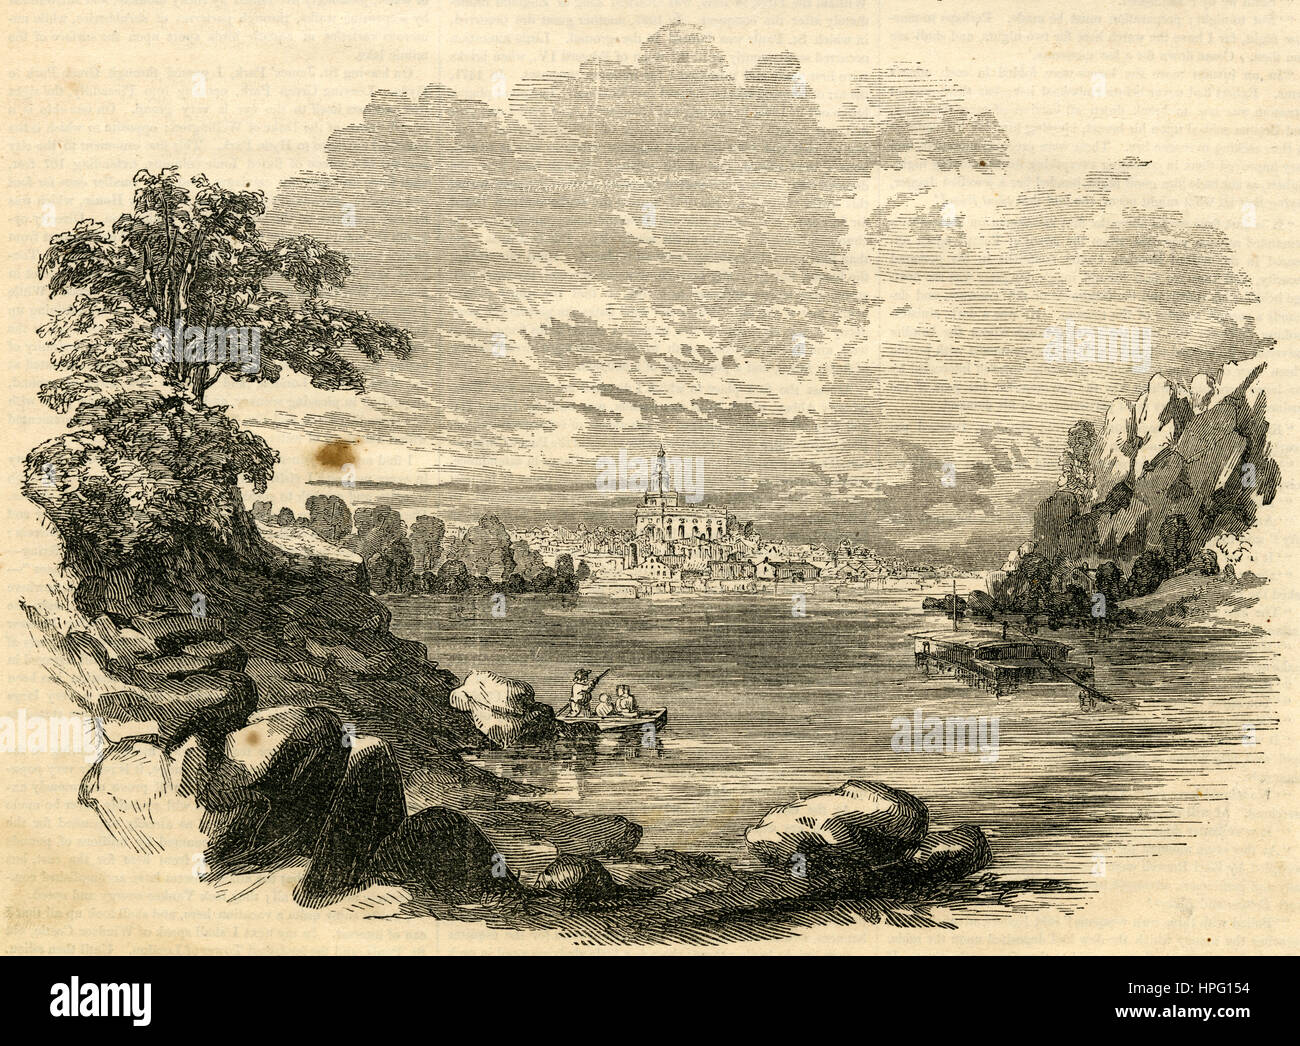 Antique 1854 engraving, 'Nauvoo from the Mississippi, Looking down the River' with the Illinois LDS Temple at center. Nauvoo is a small city in Hancock County, Illinois, United States, on the Mississippi River. SOURCE: ORIGINAL ENGRAVING. Stock Photo